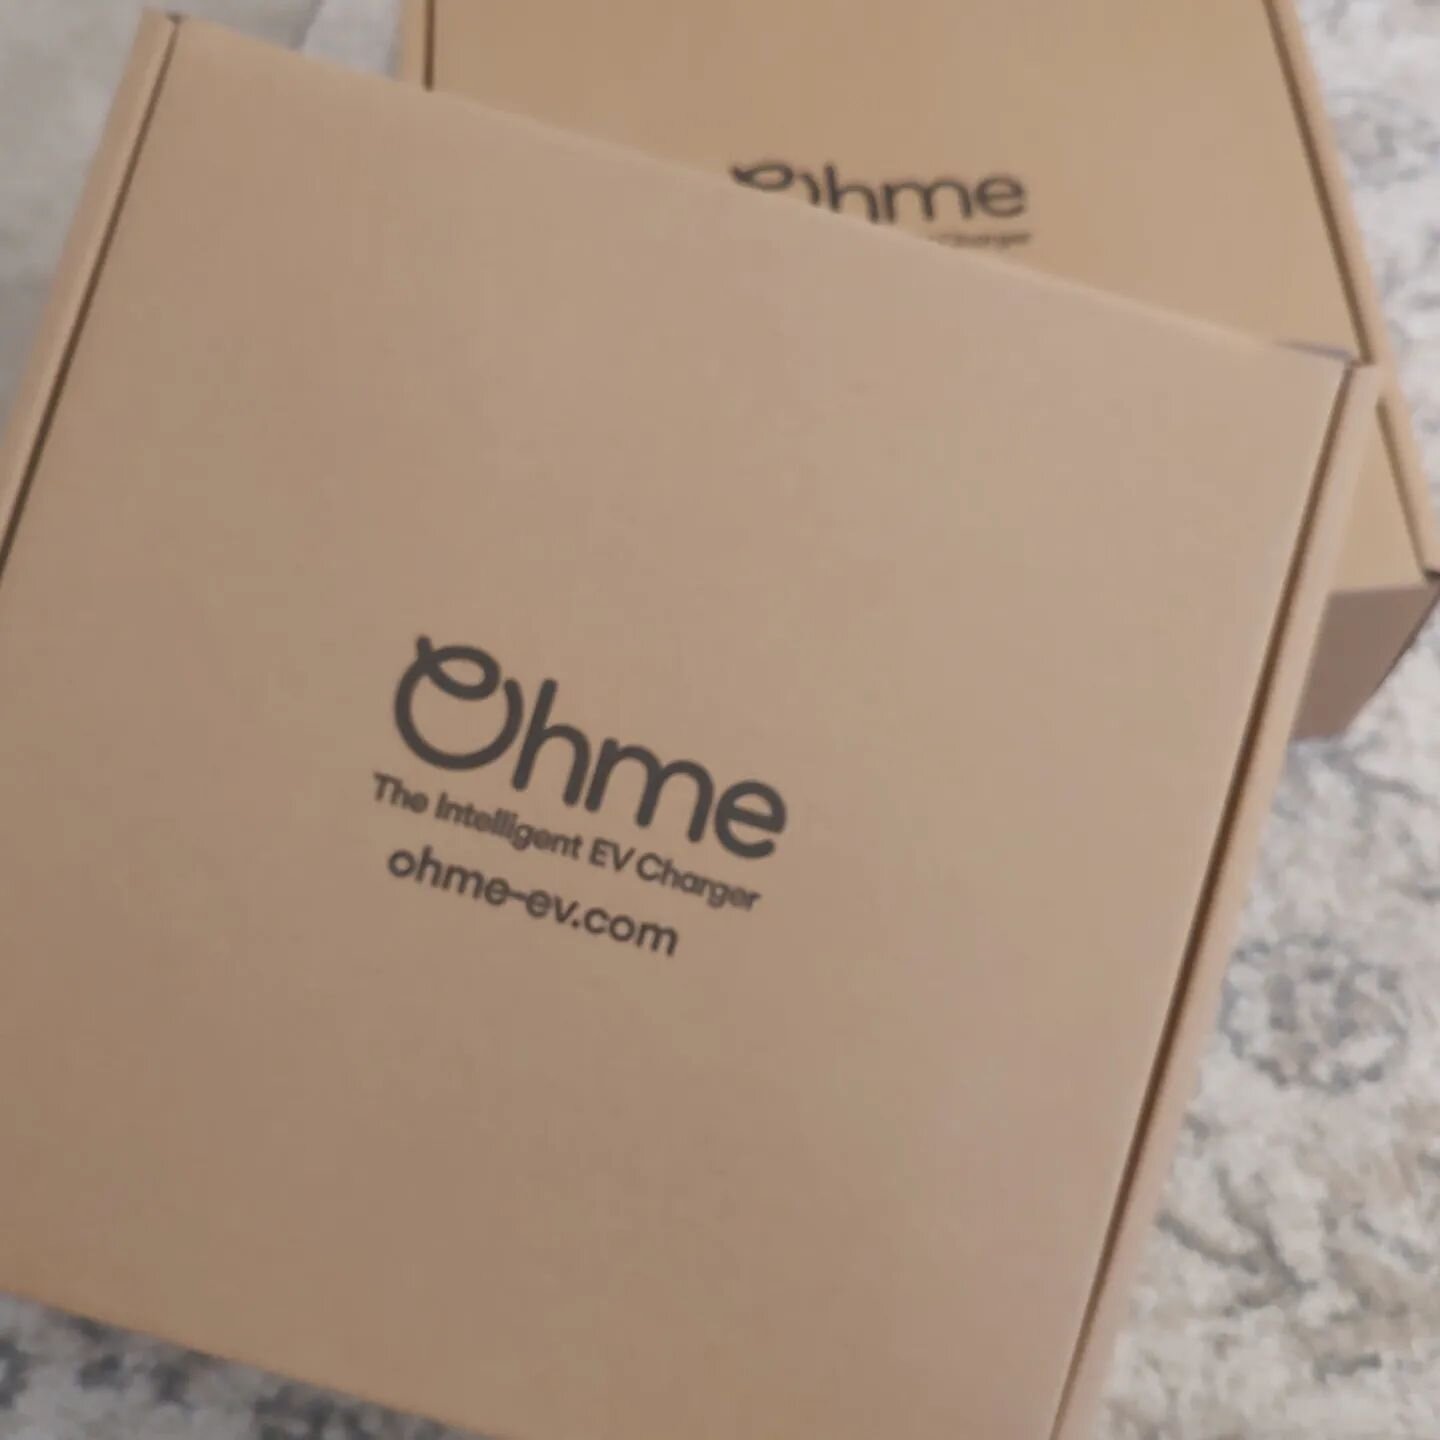 Just taken delivery of some @ohmeev chargers ready for a couple of installations within the next couple of weeks. #ev #evchargermidlands #evchargernorthampton #evnorthampton #ohme #ohmehomeprosmartcharger #ohmehomepro